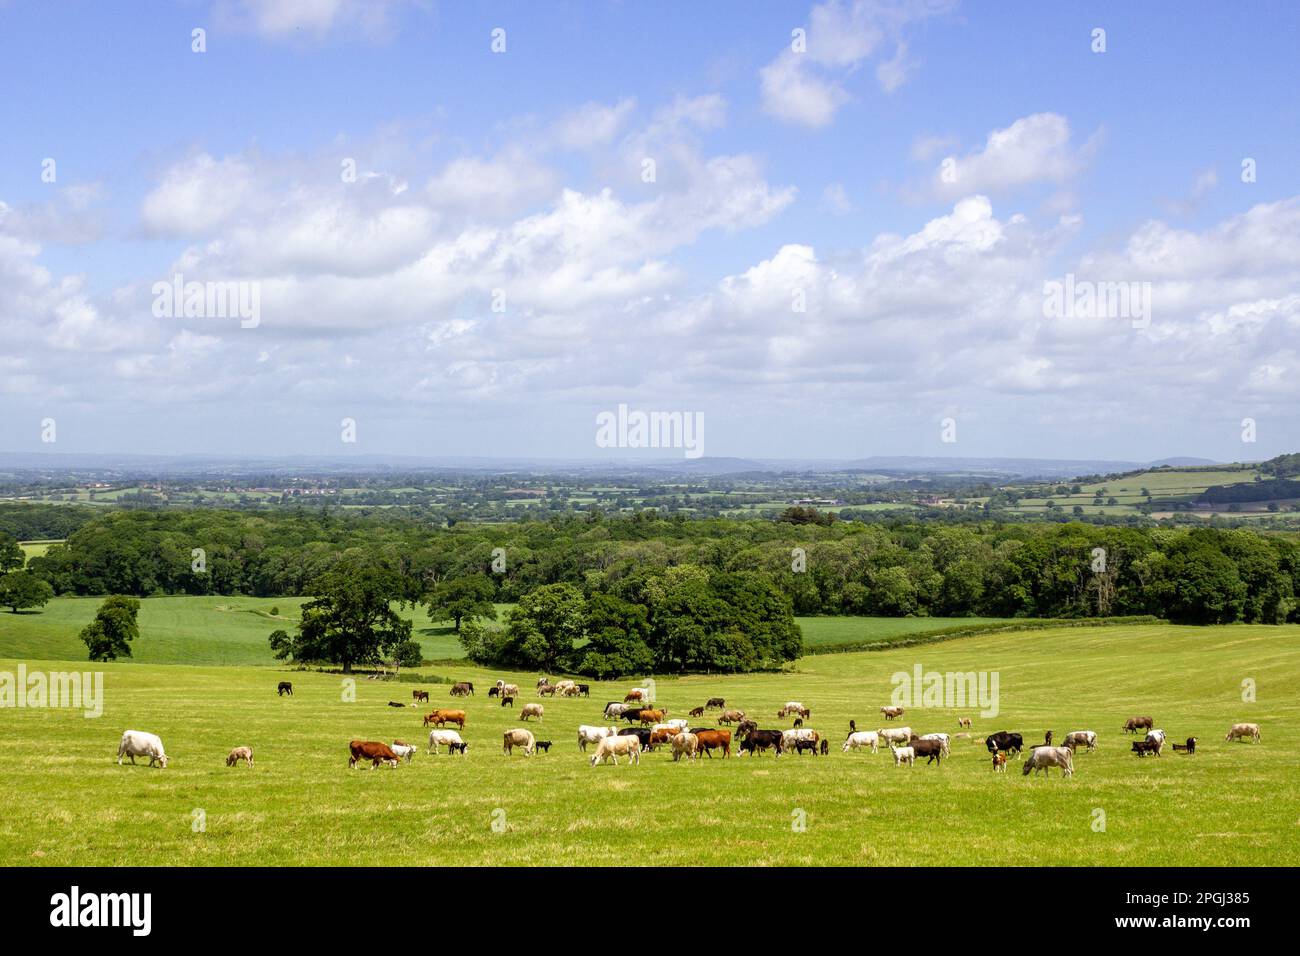 A herd of cows graze in a field in the Blackmore Vale, North Dorset on a sunny summer's day Stock Photo